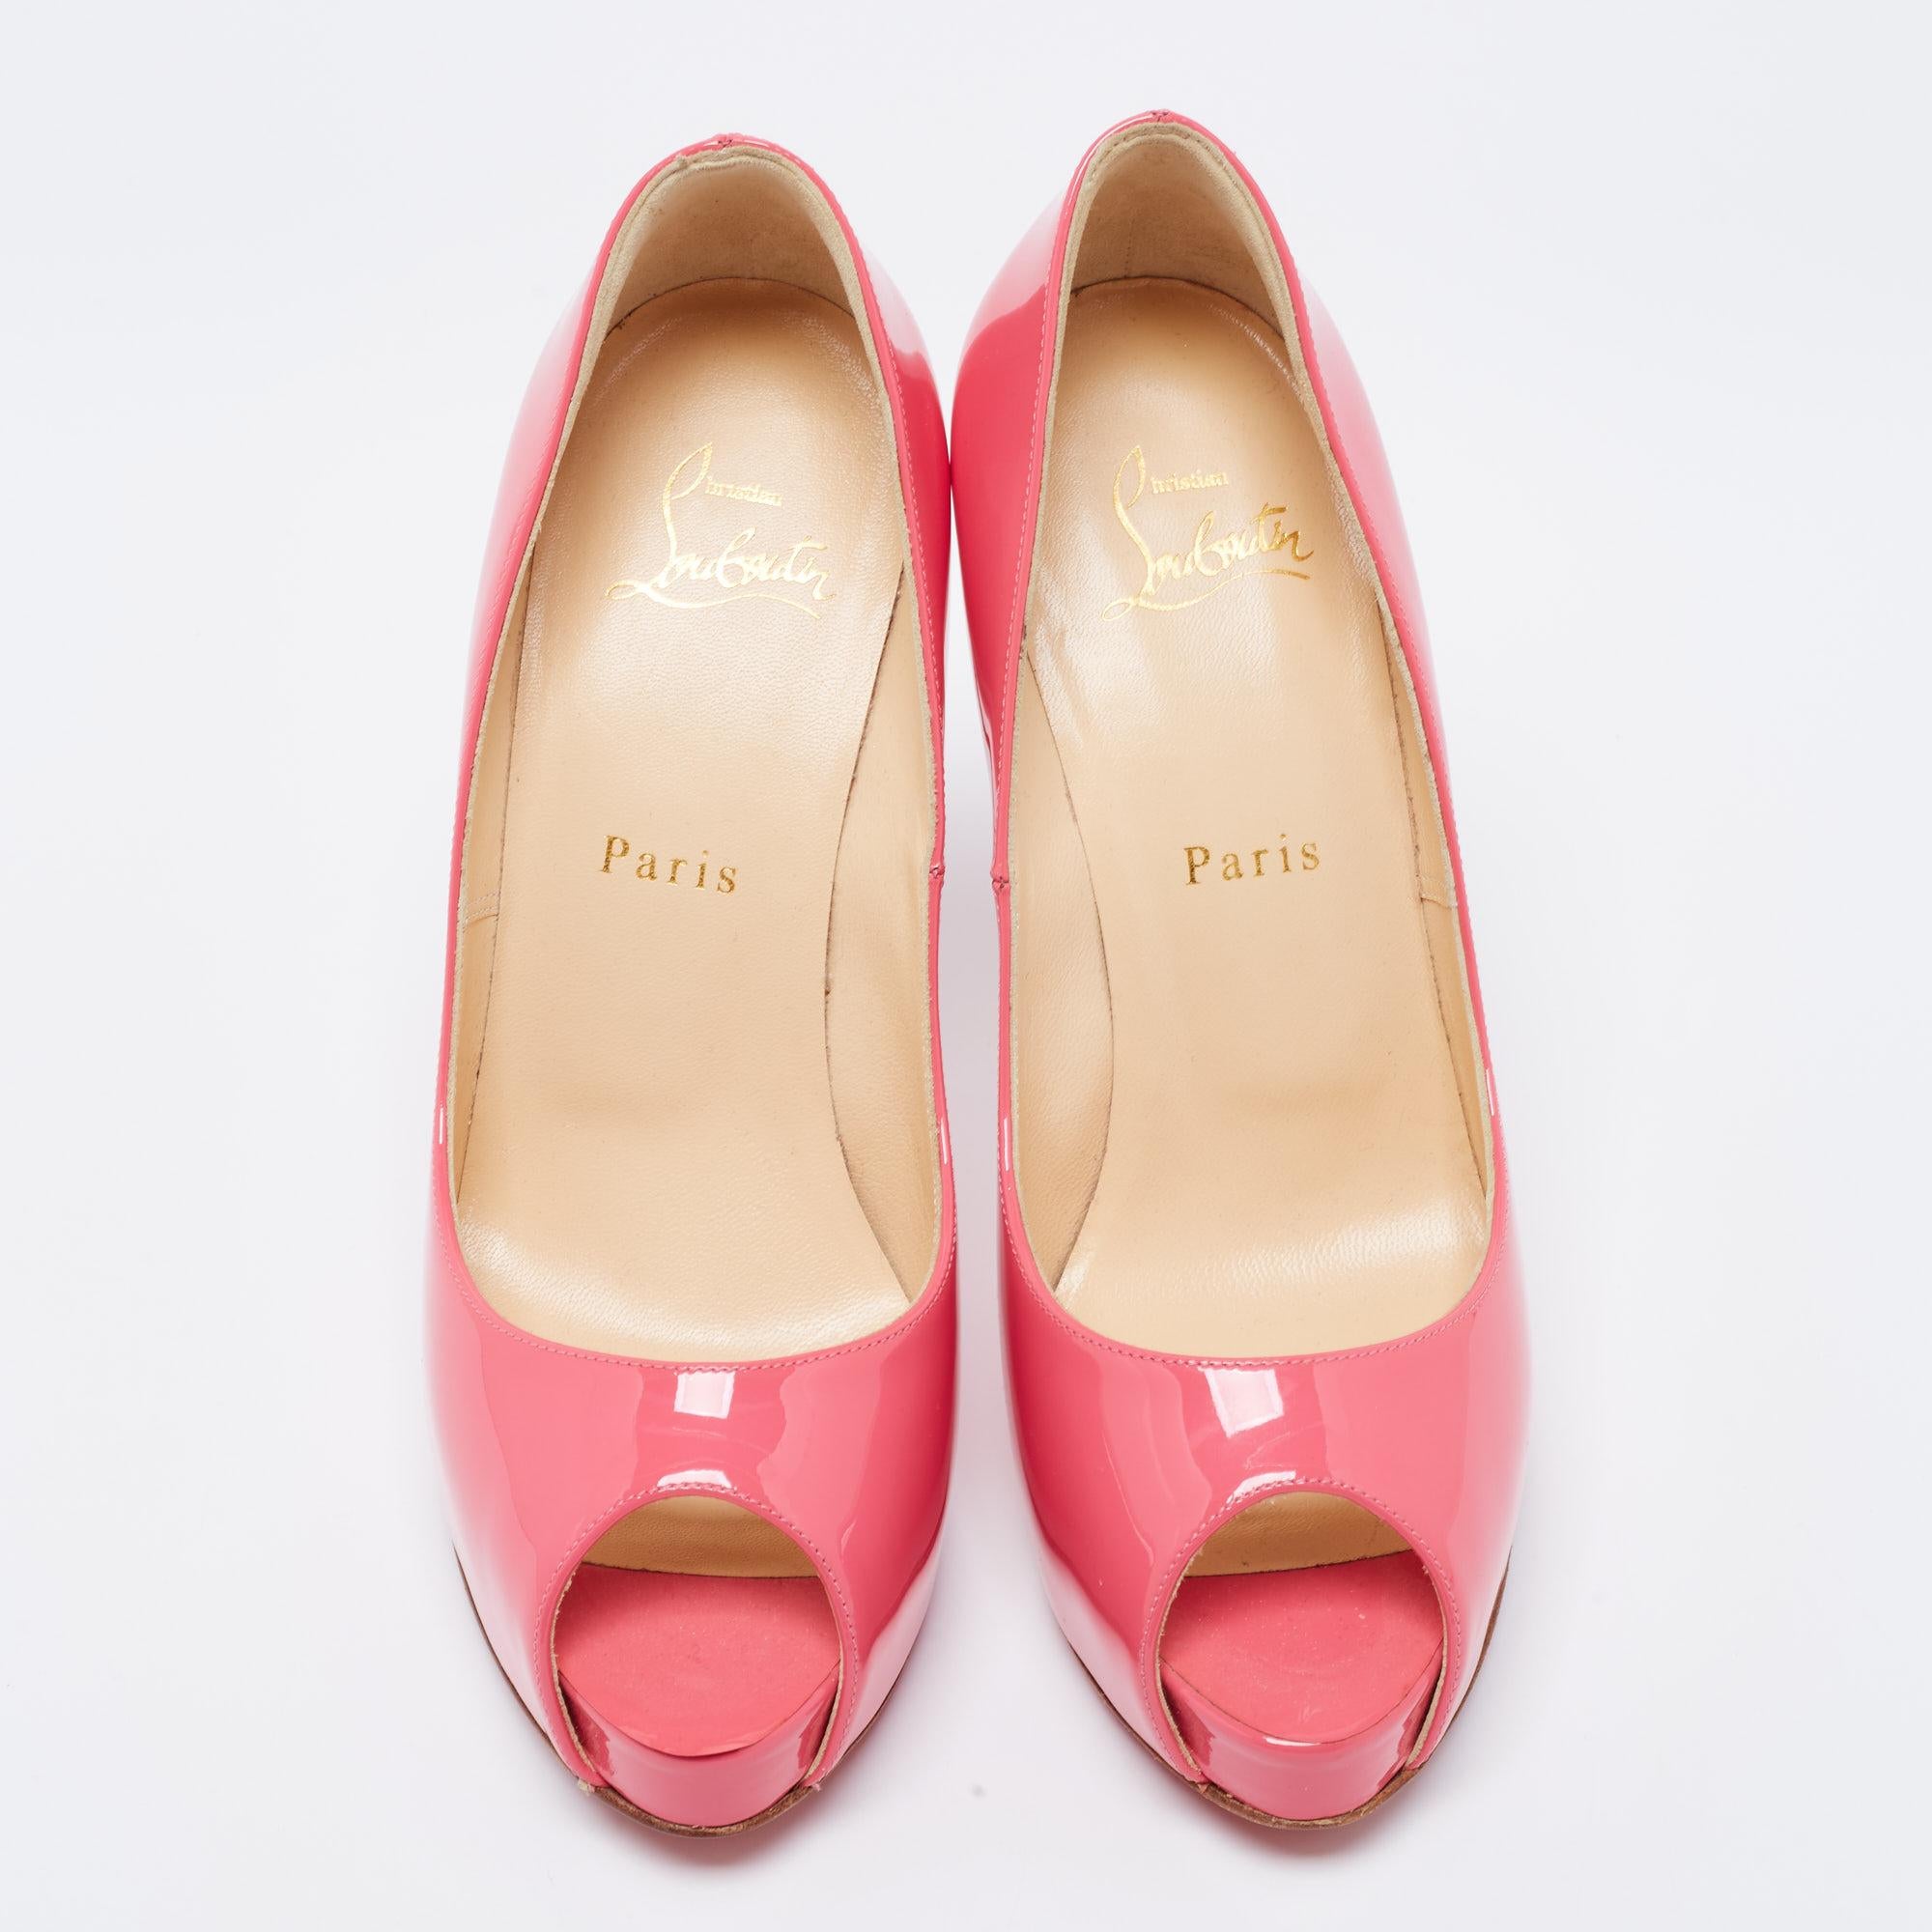 Christian Louboutin Pink Patent Leather New Very Prive Peep-Toe Pumps Size 37.5 In Good Condition For Sale In Dubai, Al Qouz 2